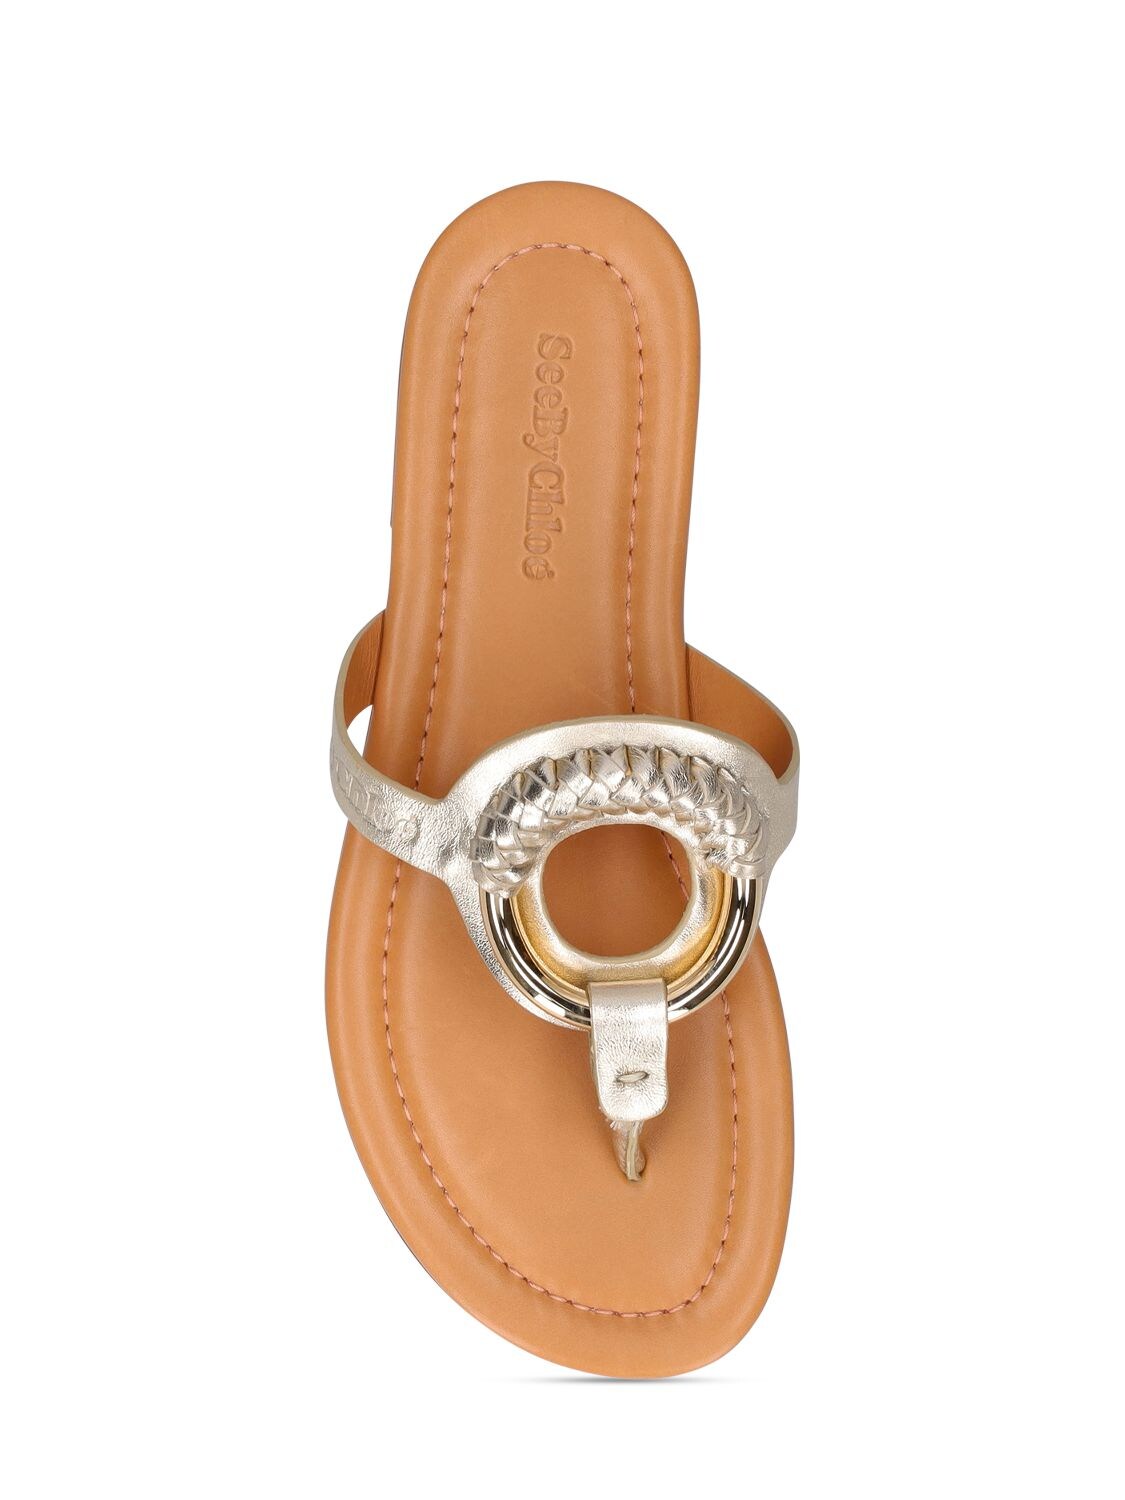 Shop See By Chloé 10mm Hana Leather Sandals In Light Gold